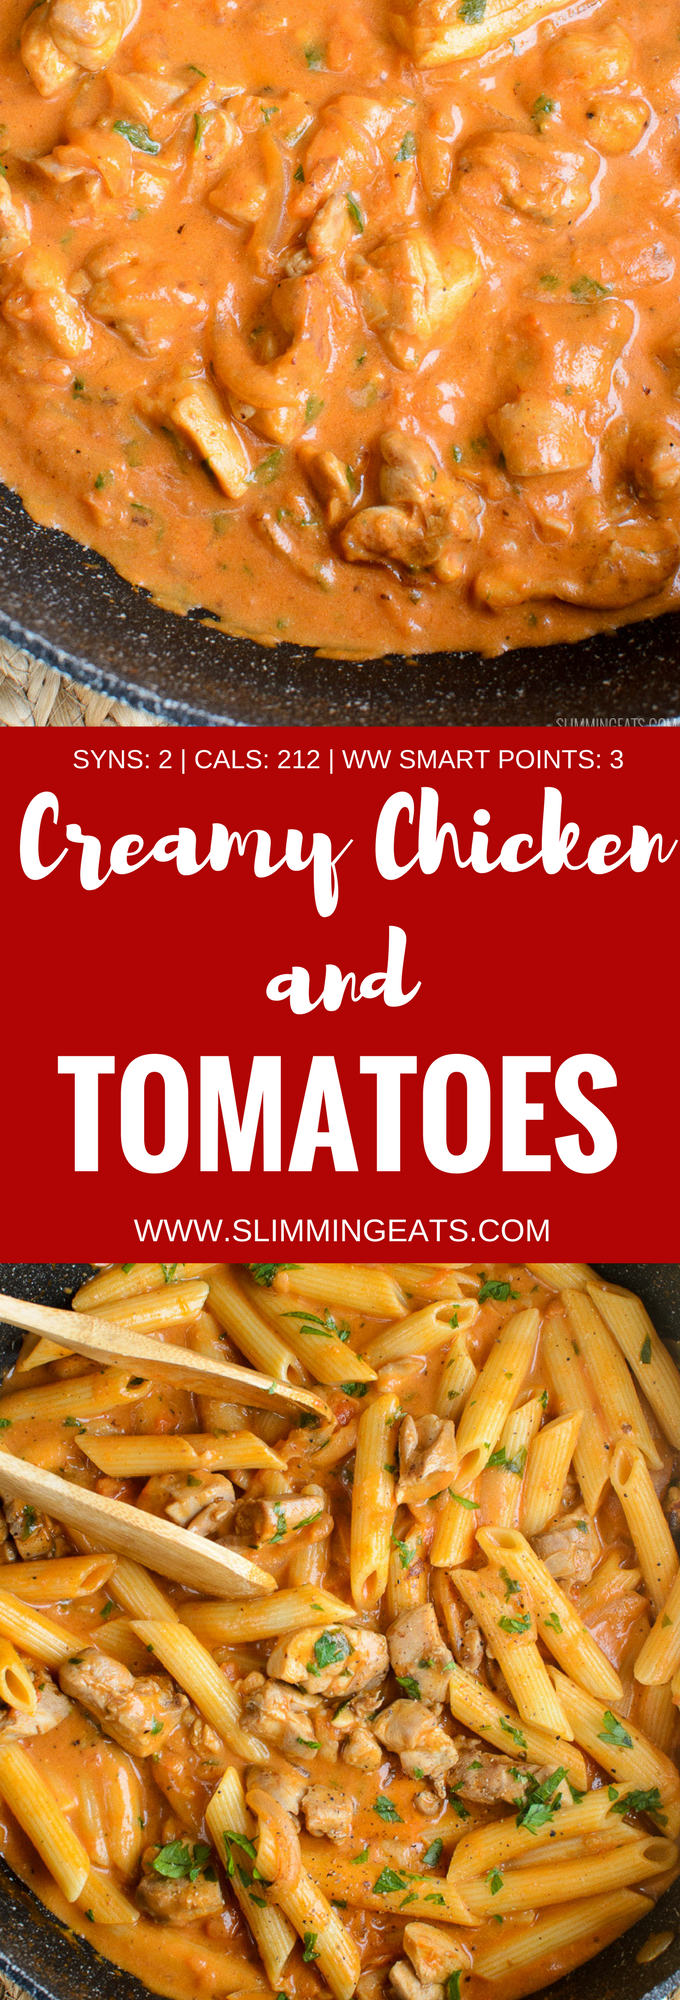 Low Syn Creamy Chicken and Tomatoes - gluten free, Slimming World and Weight Watchers friendly